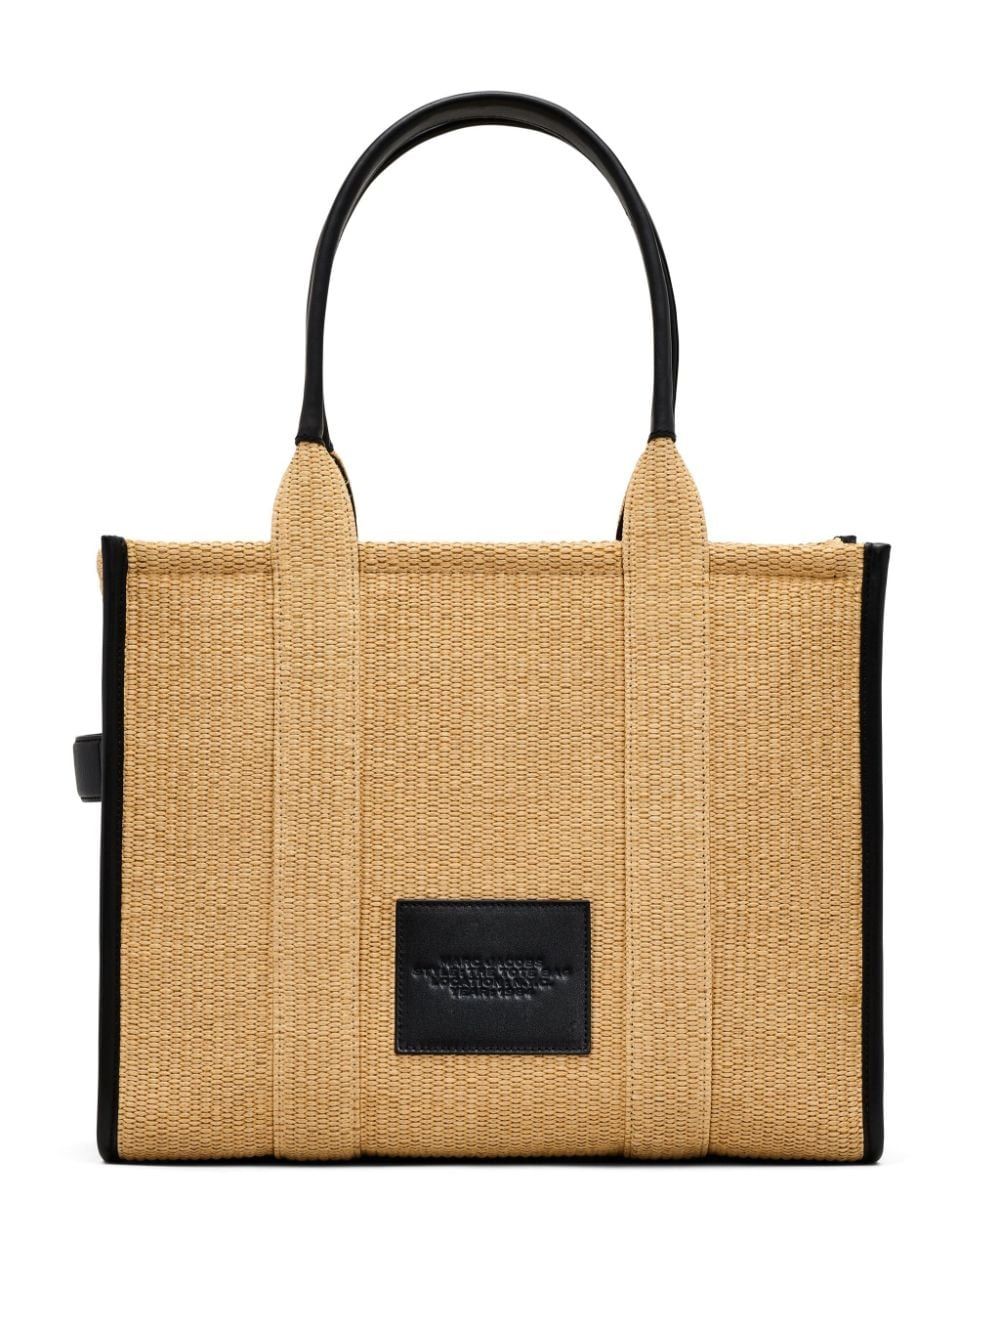 MARC JACOBS Large Woven Tote Handbag in Beige with Logo Detail, 60% Polypropylene 40% Cotton - SS24